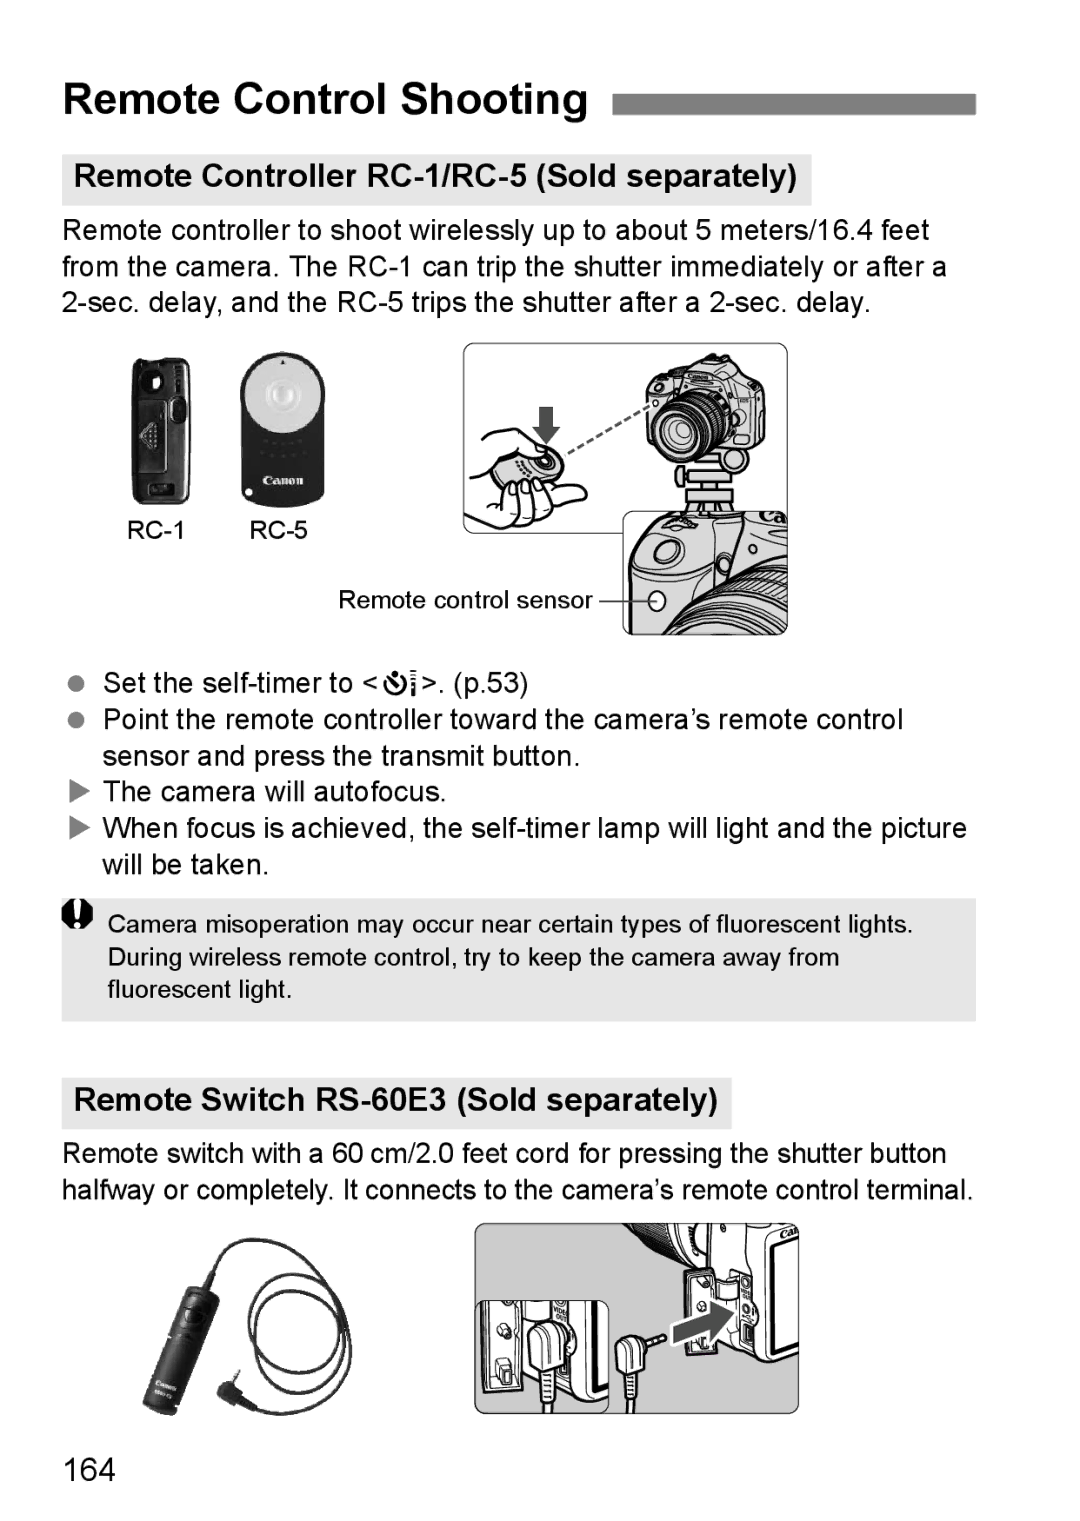 Canon EOS 450D Remote Control Shooting, Remote Controller RC-1/RC-5 Sold separately, Remote Switch RS-60E3 Sold separately 